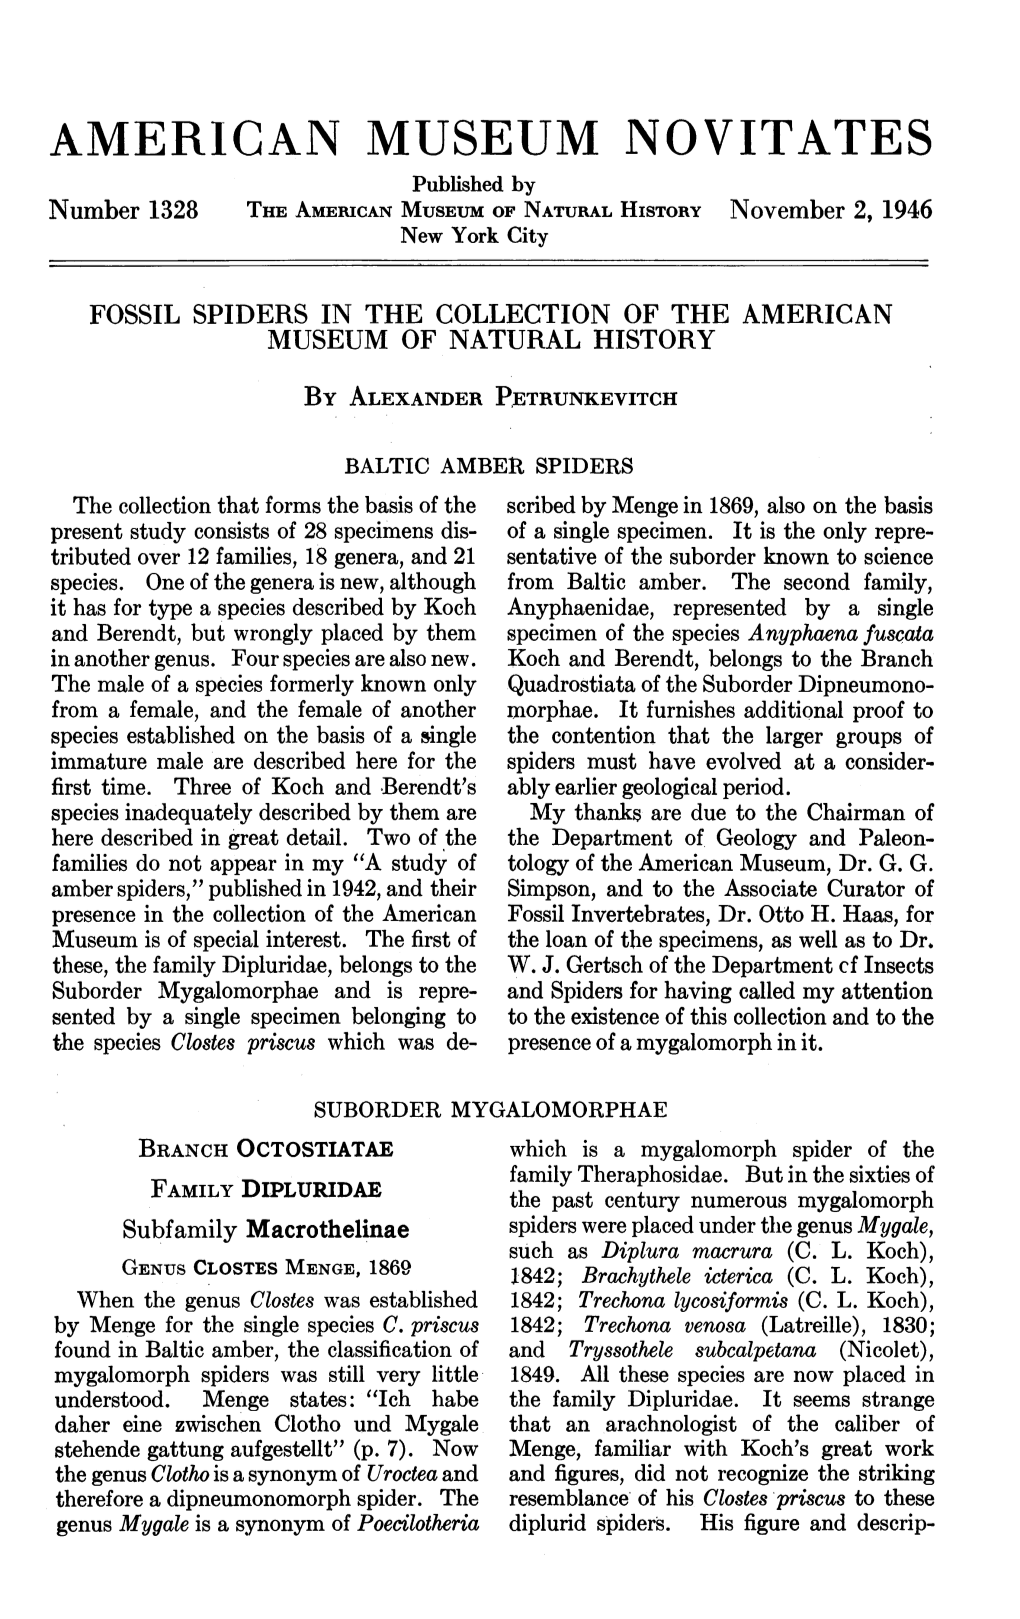 AMERICAN MUSEUM NOVITATES Published by Number 1328 the AMERICAN MUSEUM of NATURAL HISTORY November 2, 1946 New York City